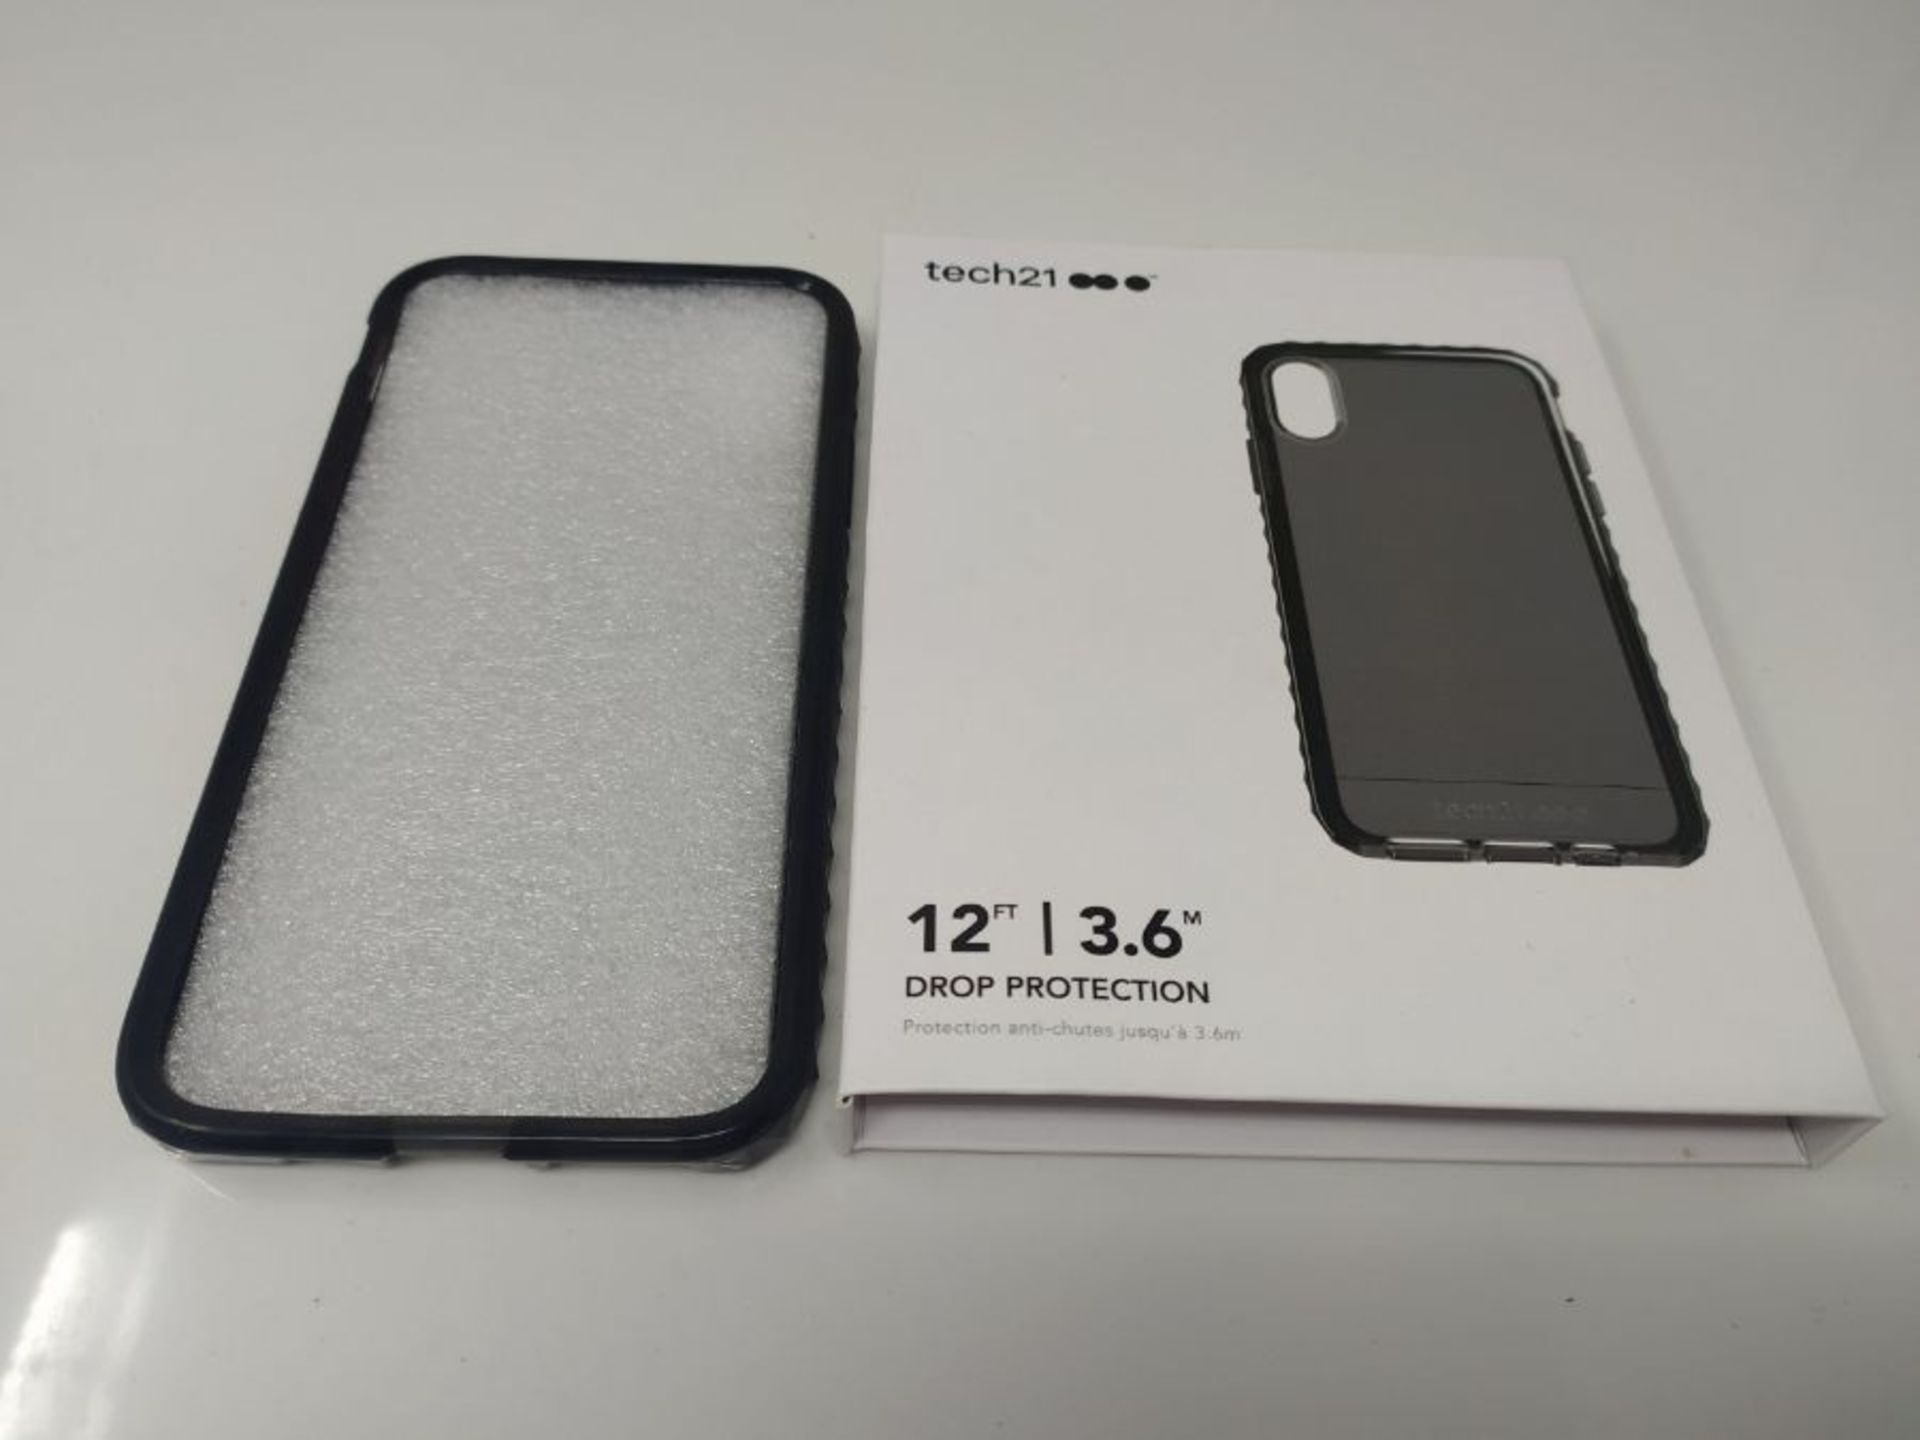 Tech21 Evo Rox for Apple iPhone X and XS with 12 ft. Drop Protection - Magic Black - Image 2 of 2